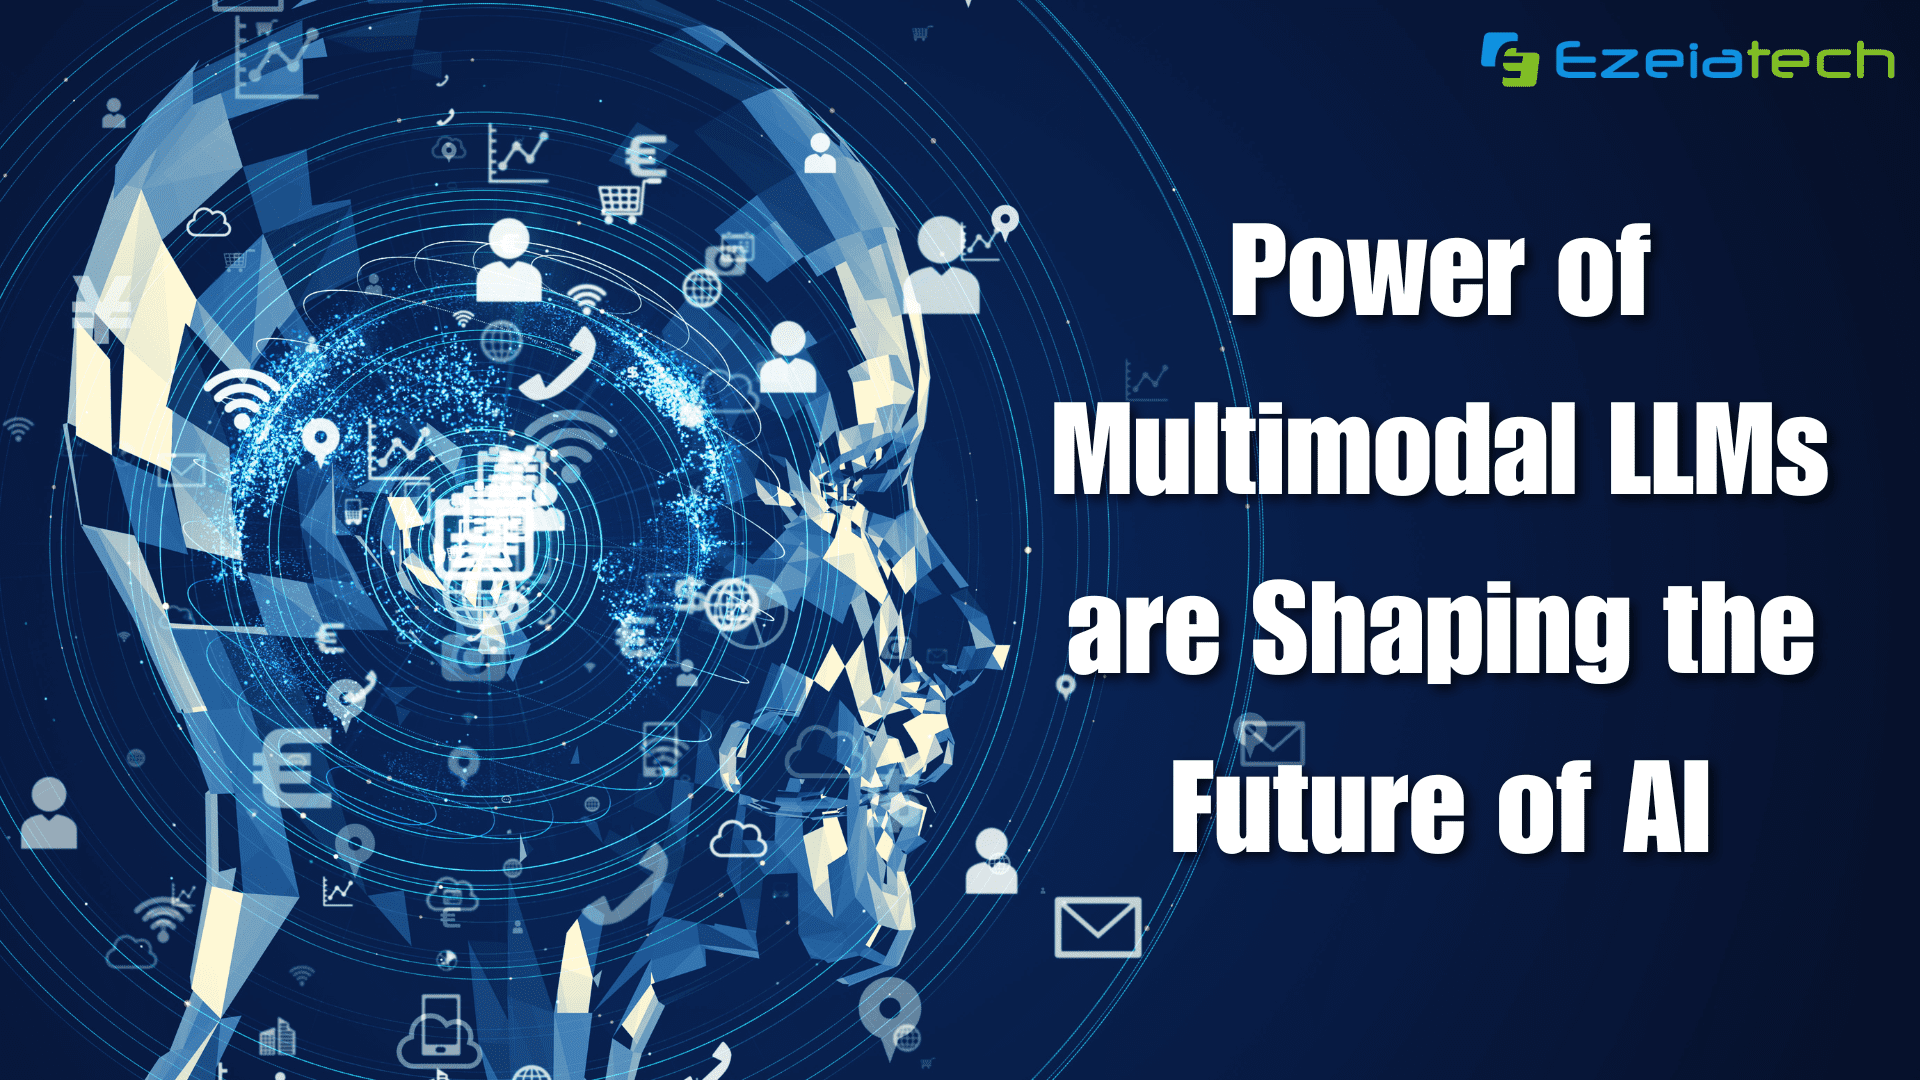 Power of Multimodal LLMs are Shaping the Future of AI